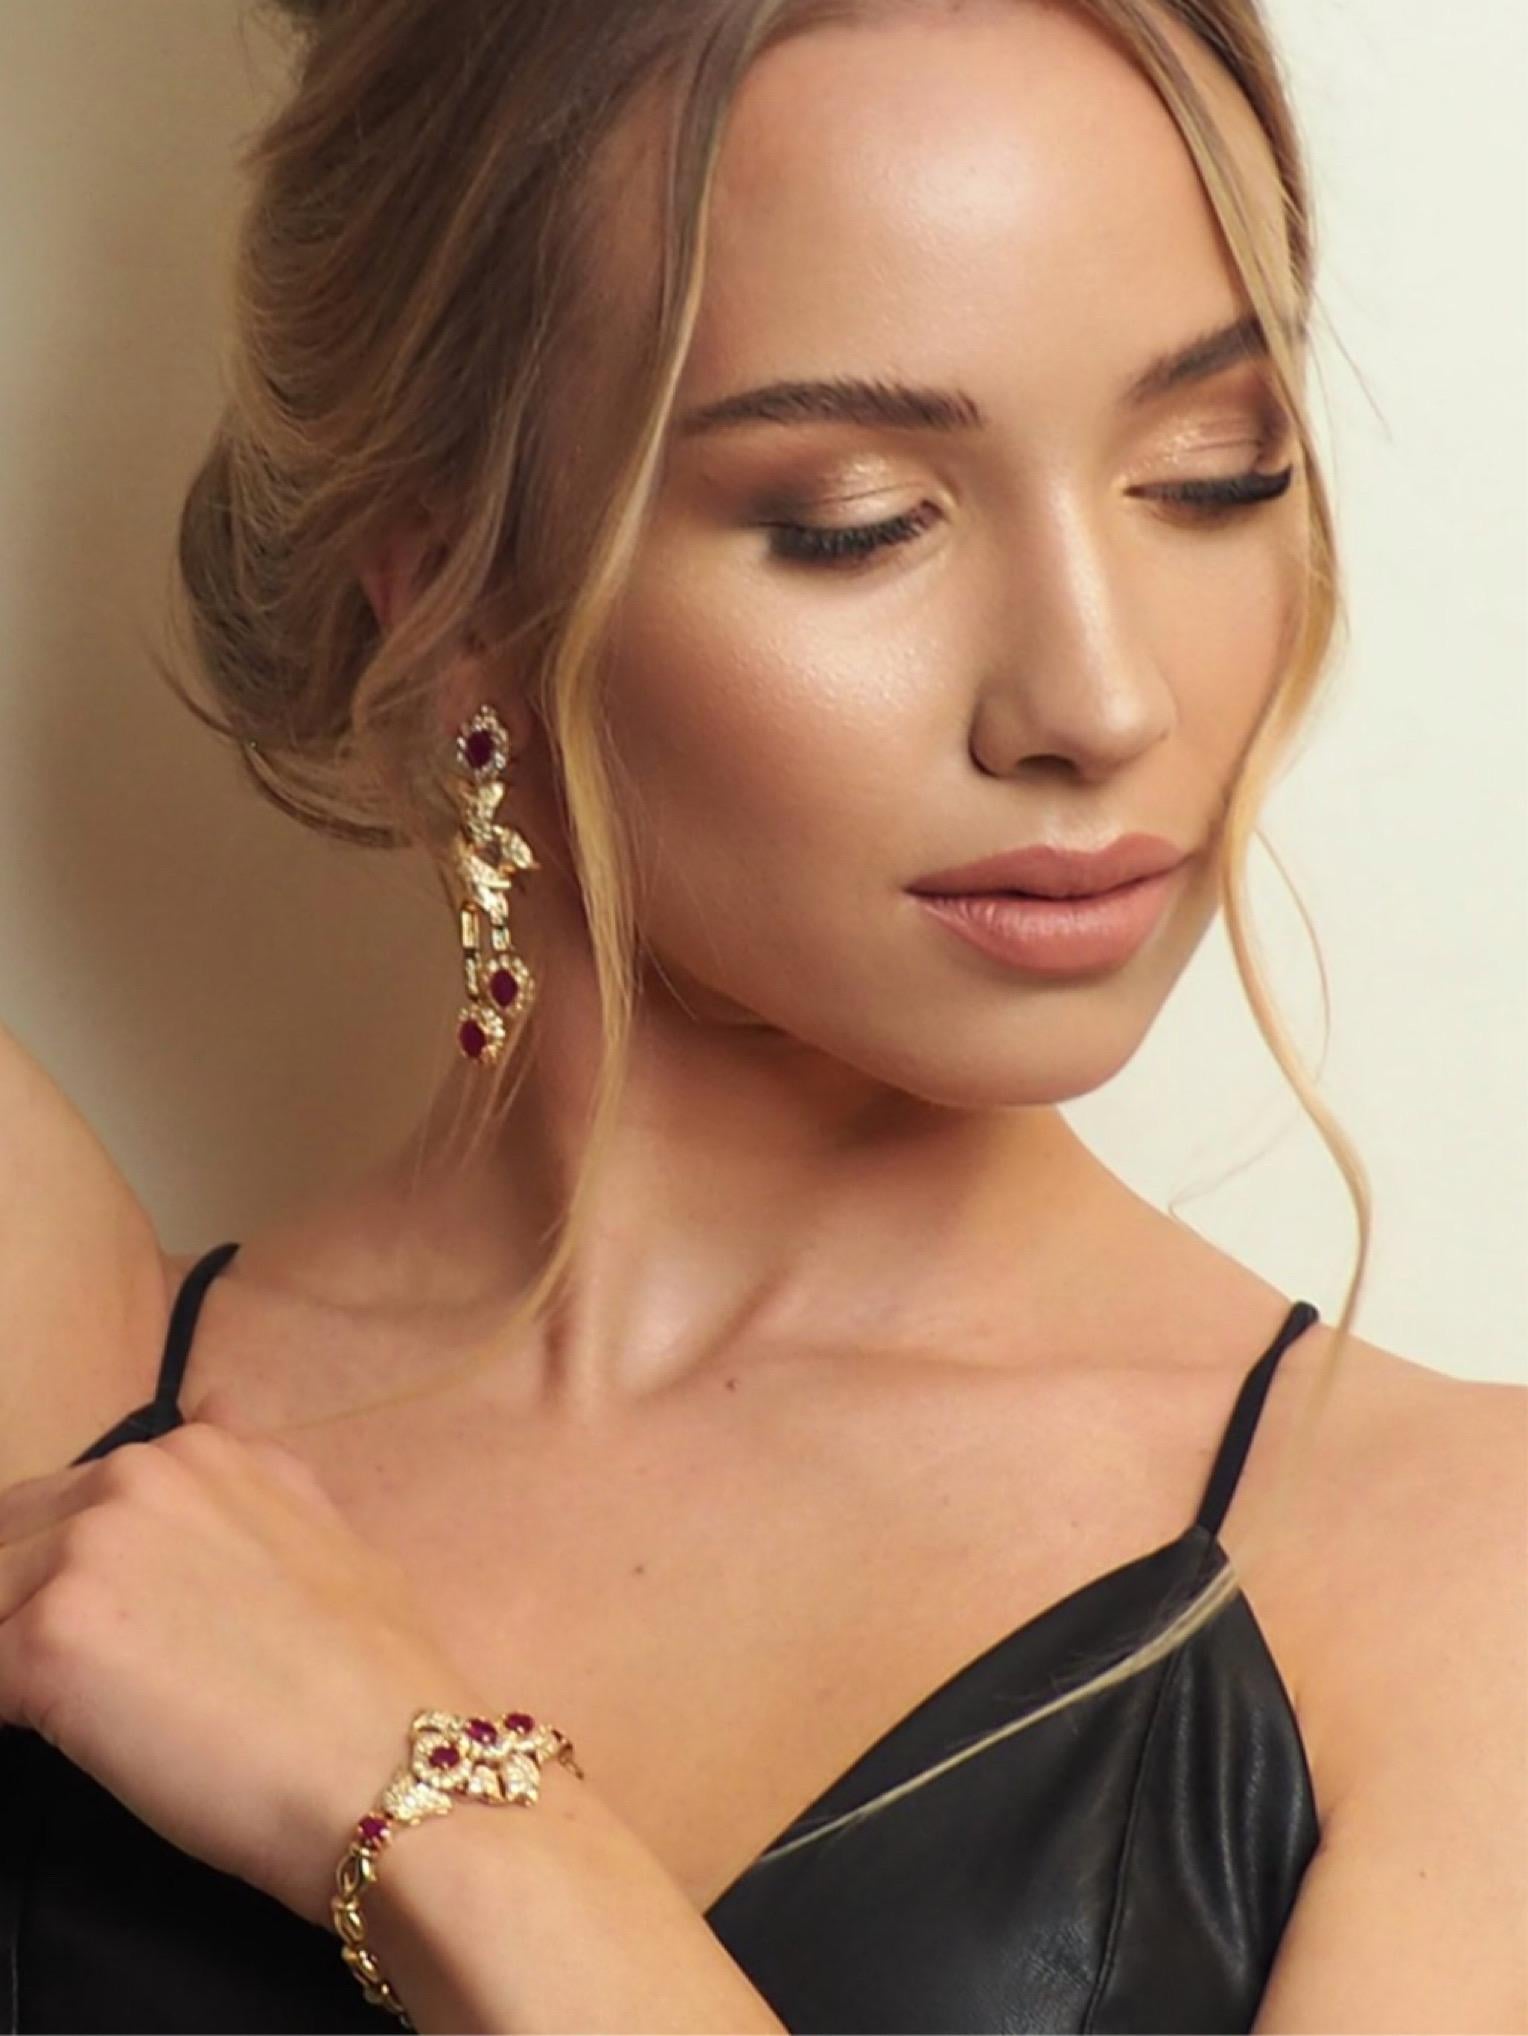 Indulge in luxury with this sophisticated and timeless set of bracelet and earrings crafted in exquisite 18K yellow gold. You'll make heads turn with the stunning bracelet, elegantly paved with brilliant-cut diamonds and rubies totaling a remarkable